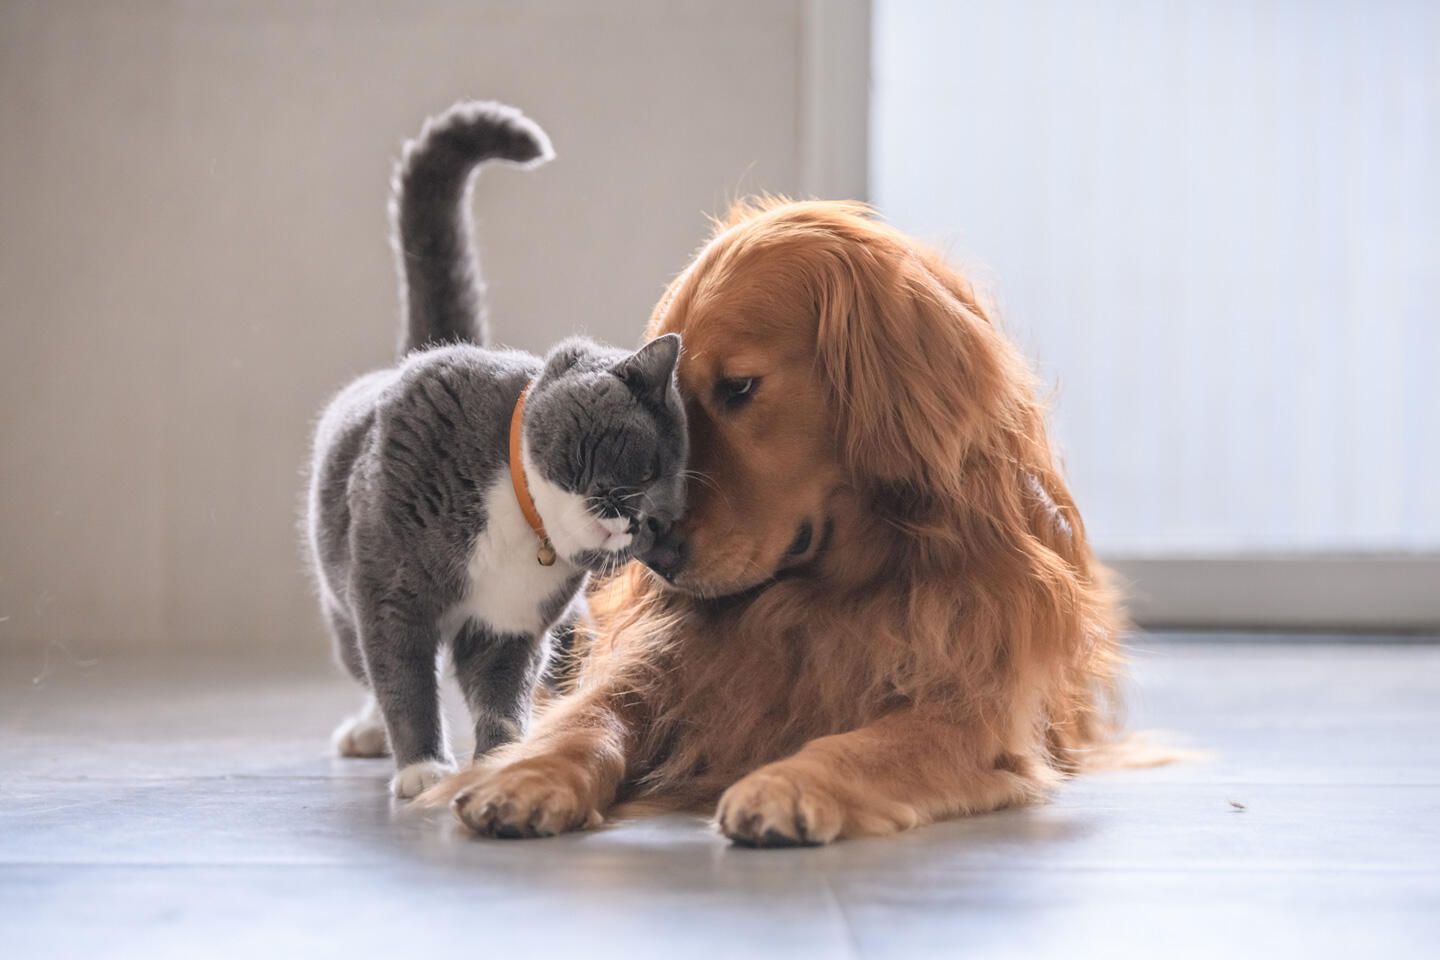 A golden retriever dog and a gray and white cat gently touch noses, symbolizing friendship between different species. The image captures a moment of sweet interaction in a naturally lit indoor environment.